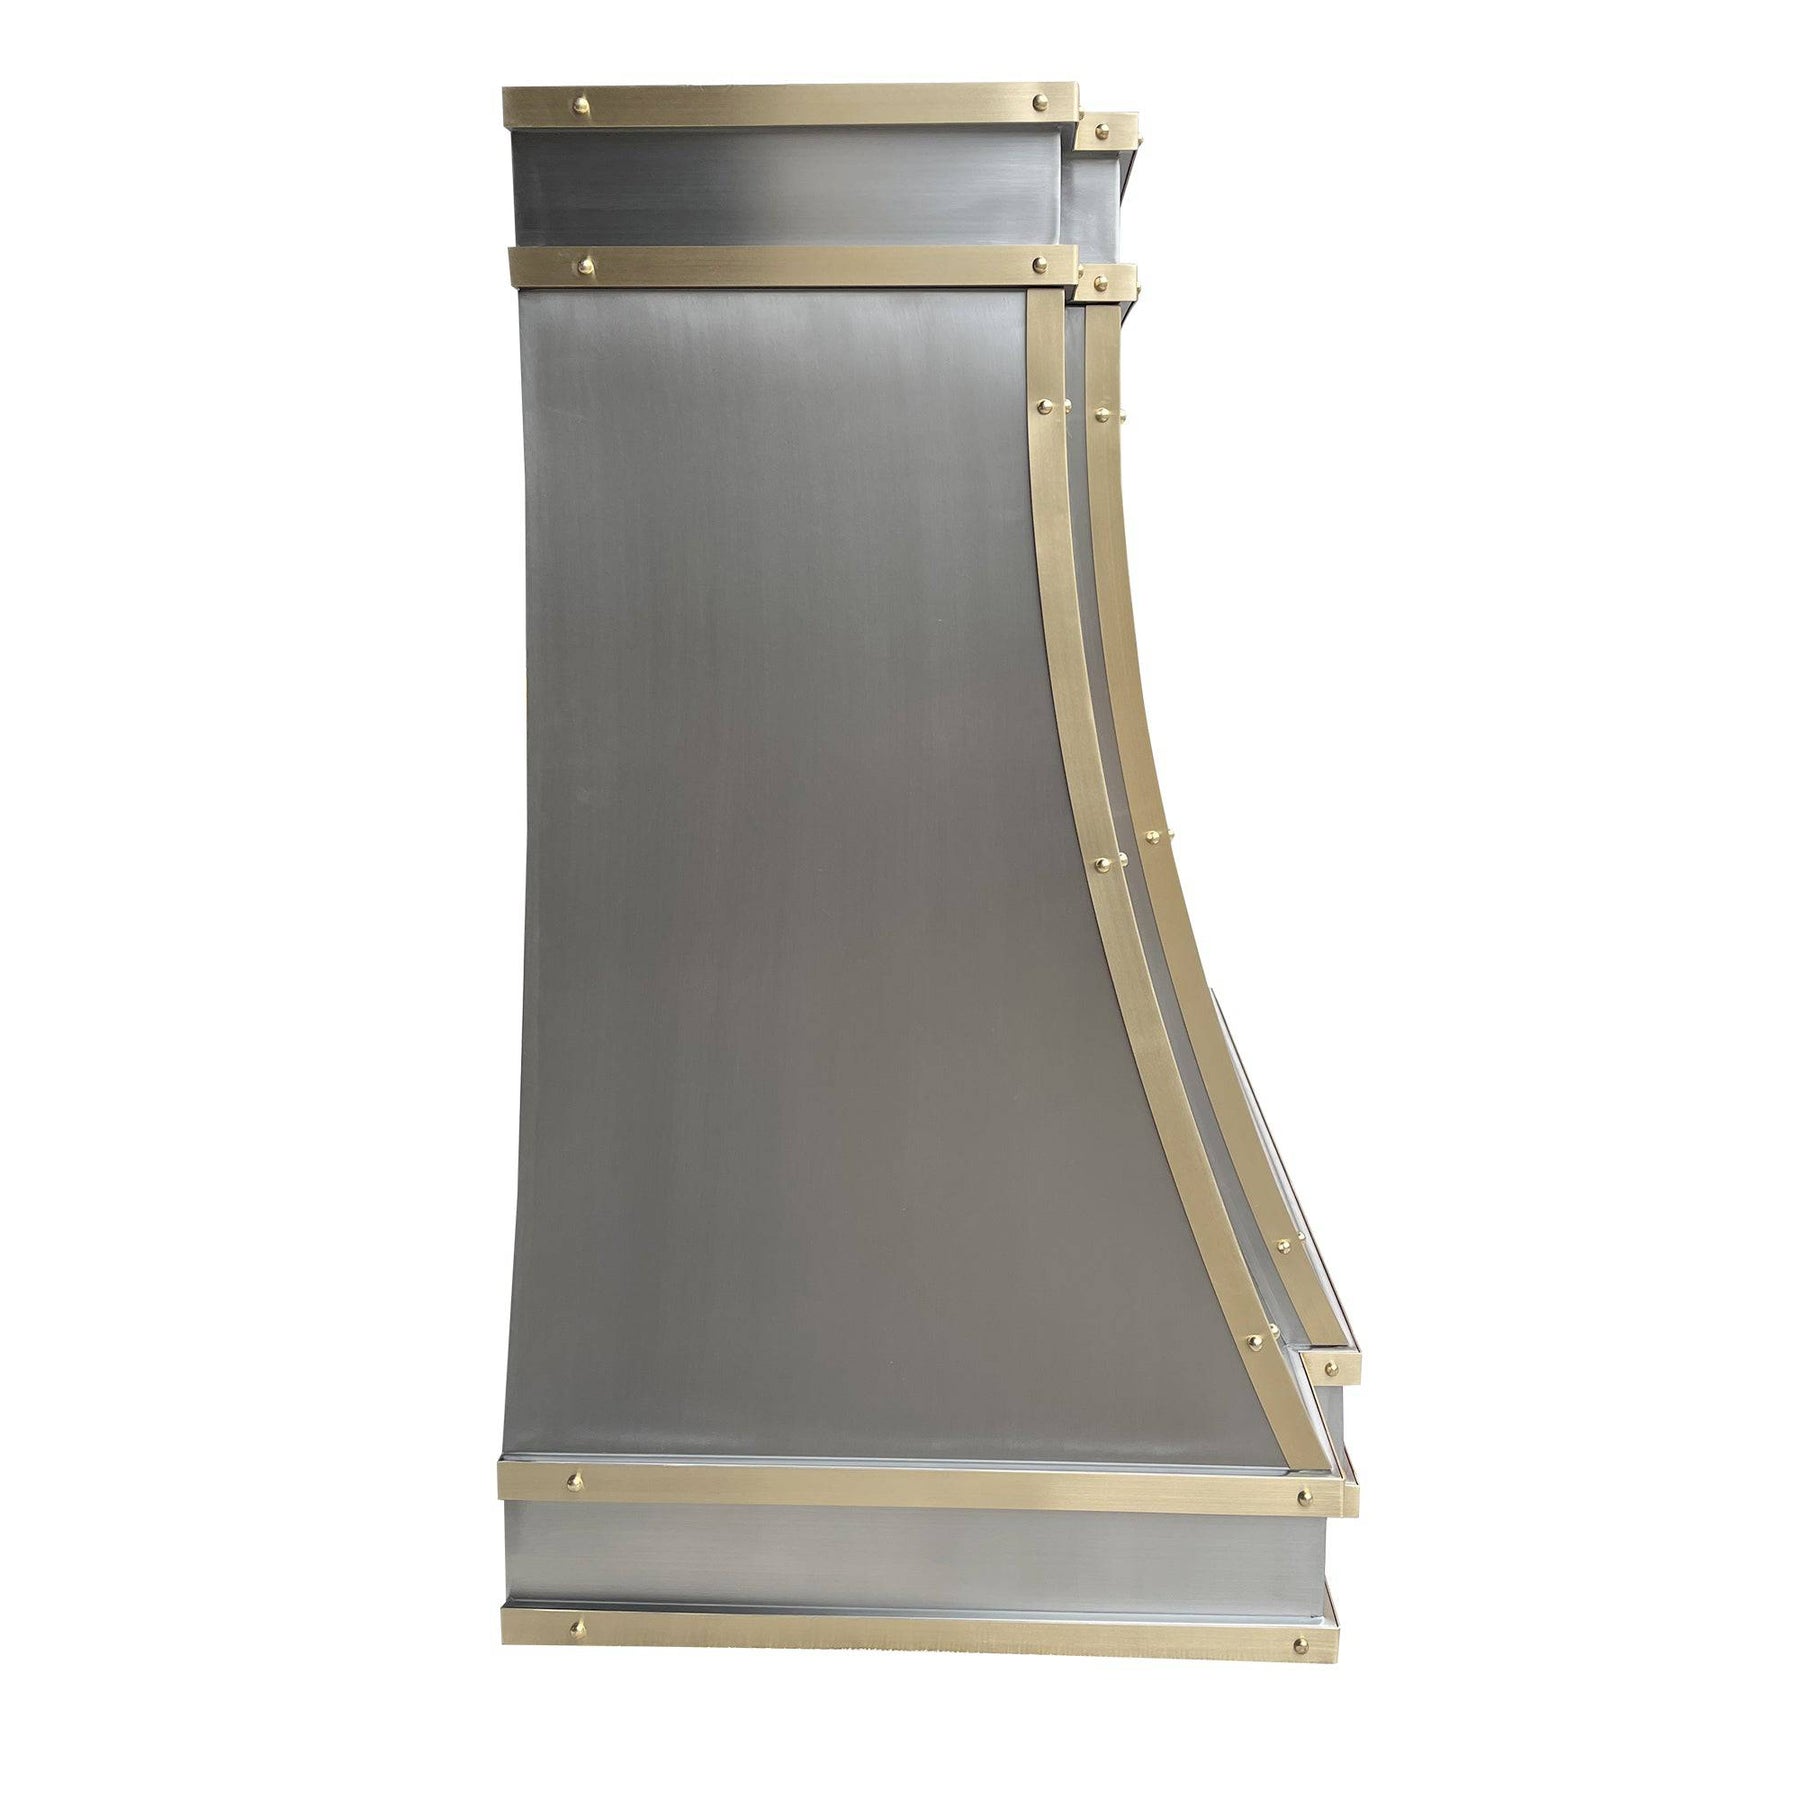 Fobest Handcrafted Brushed Stainless Steel Range Hood FSS-65